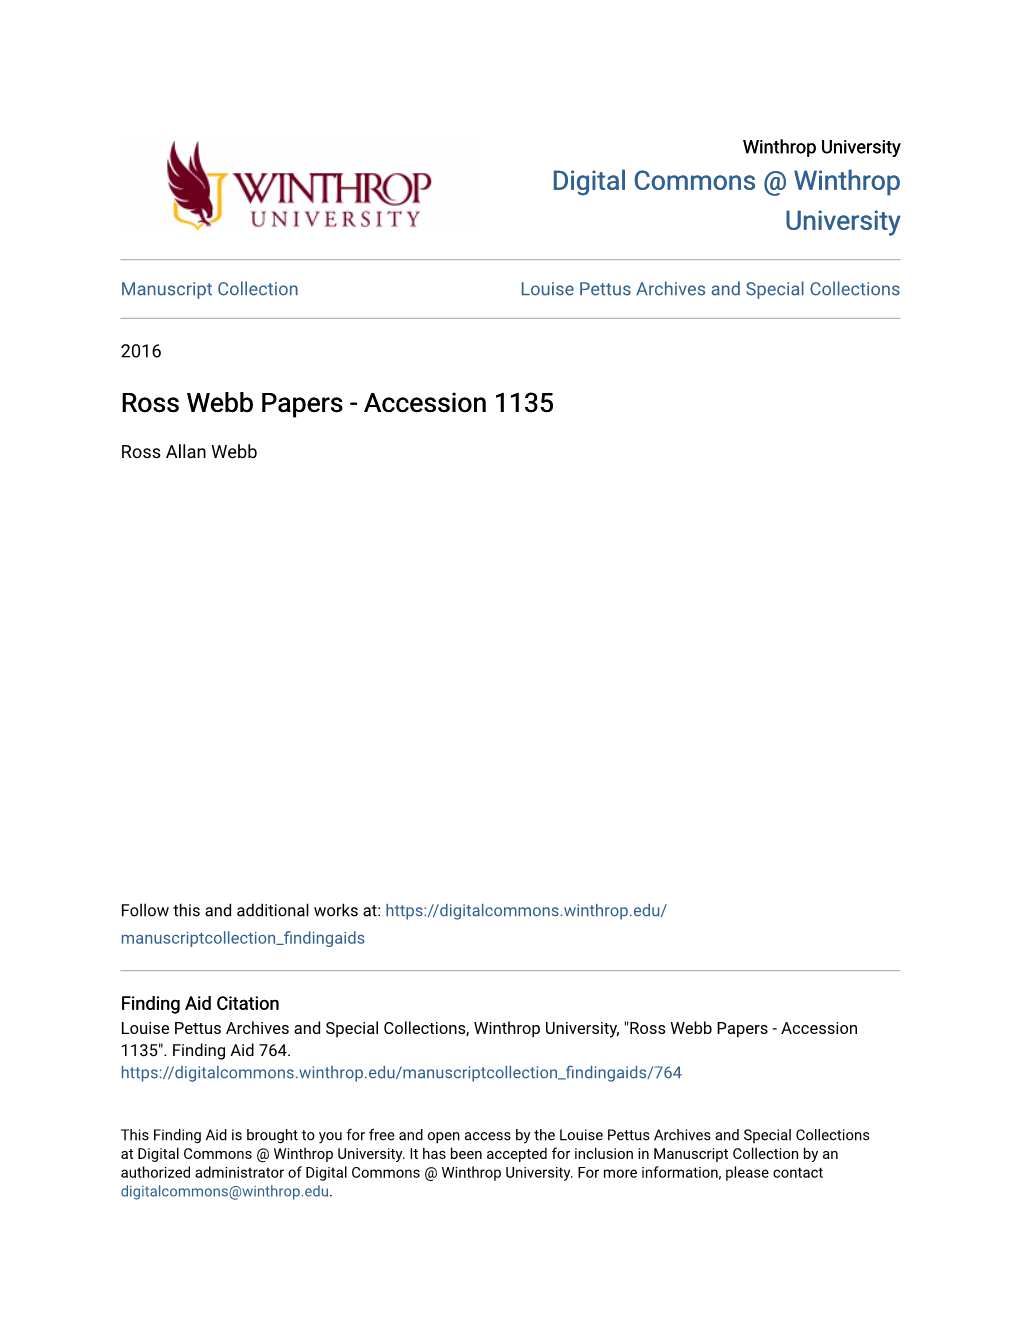 Ross Webb Papers - Accession 1135